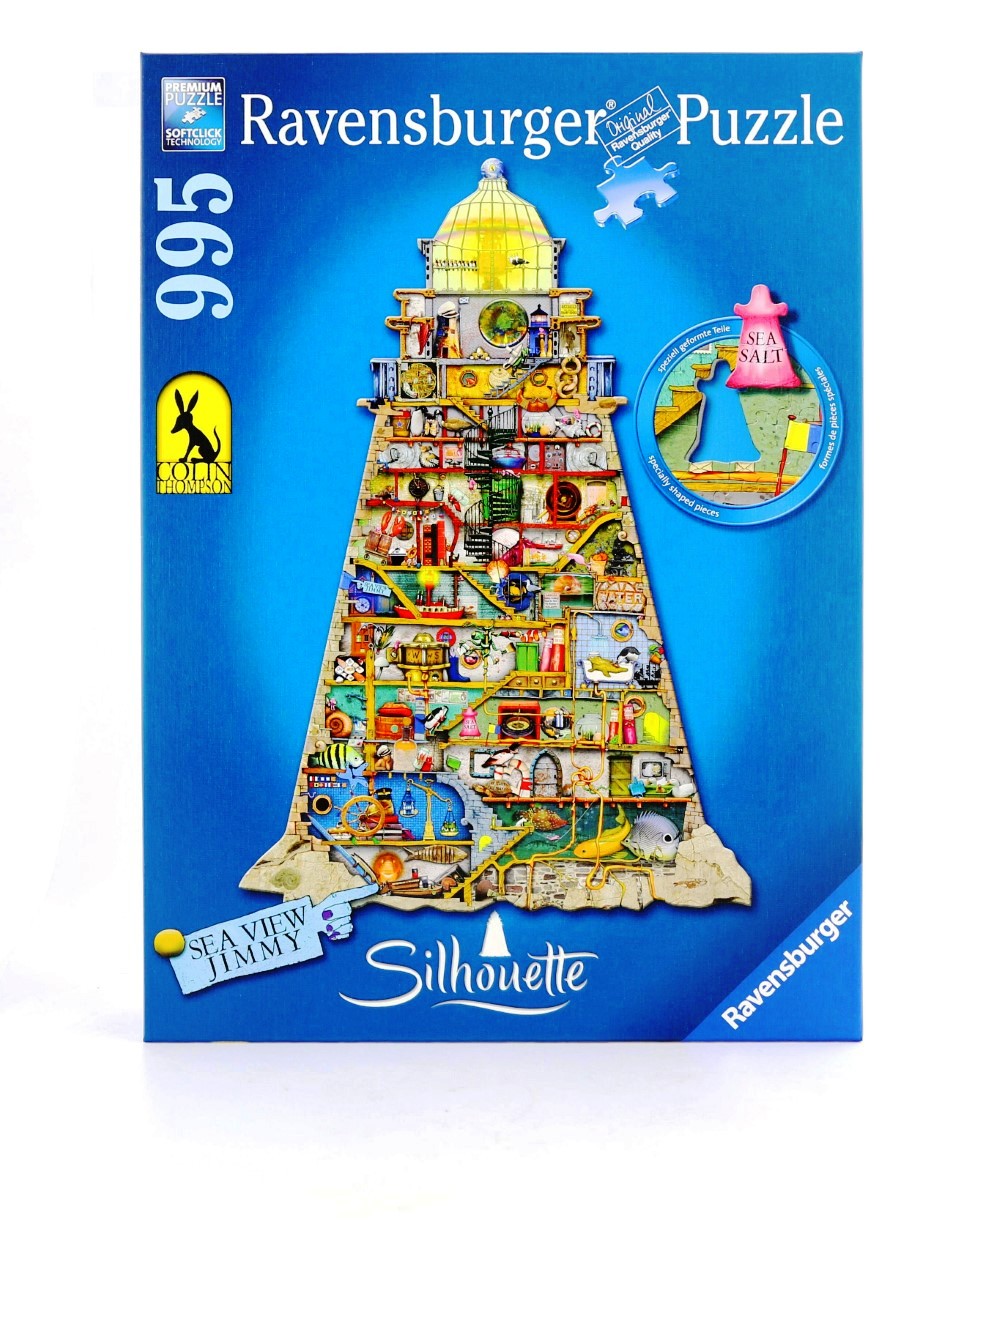 Ravensburger Silhoutte Shaped Lighthouse 995 Jigsaw Puzzle